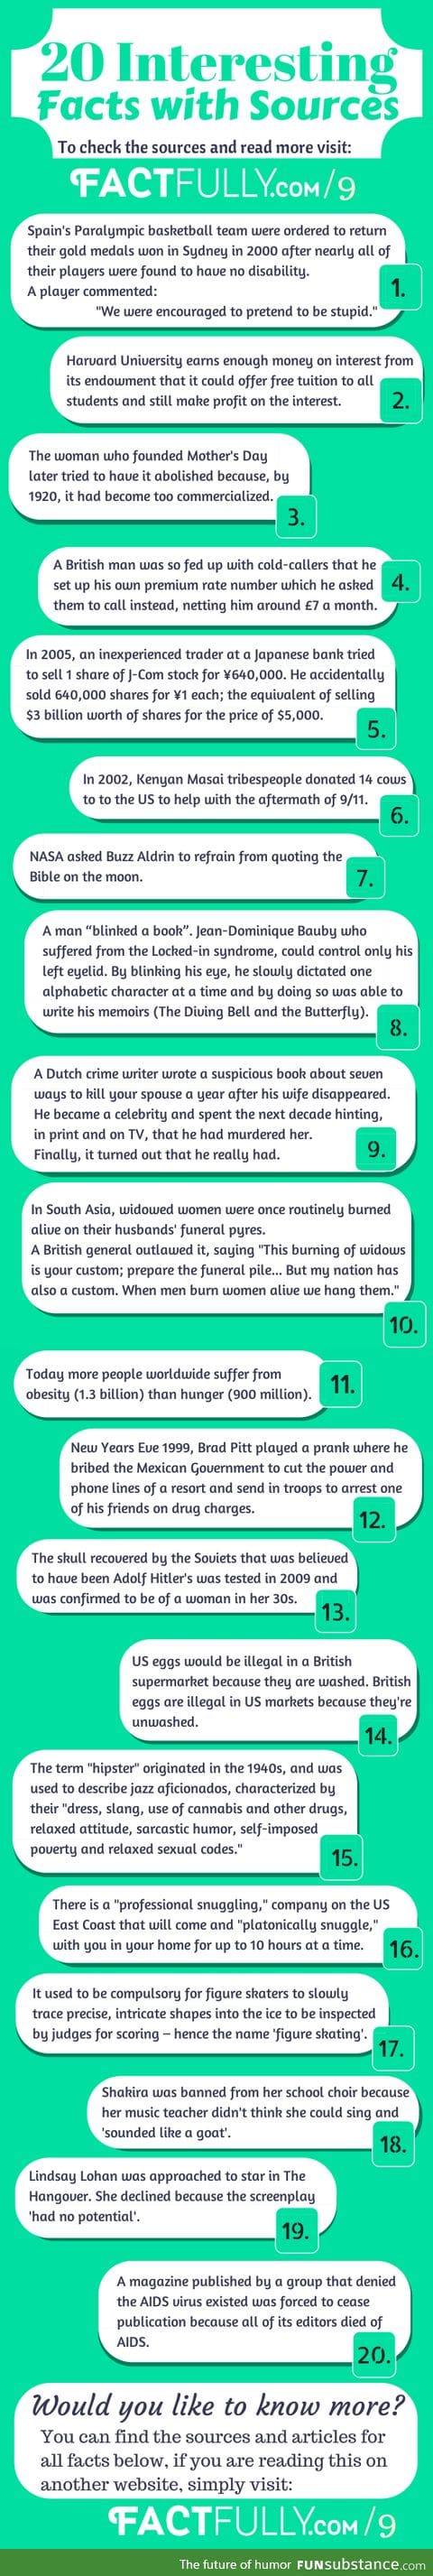 Some interesting facts